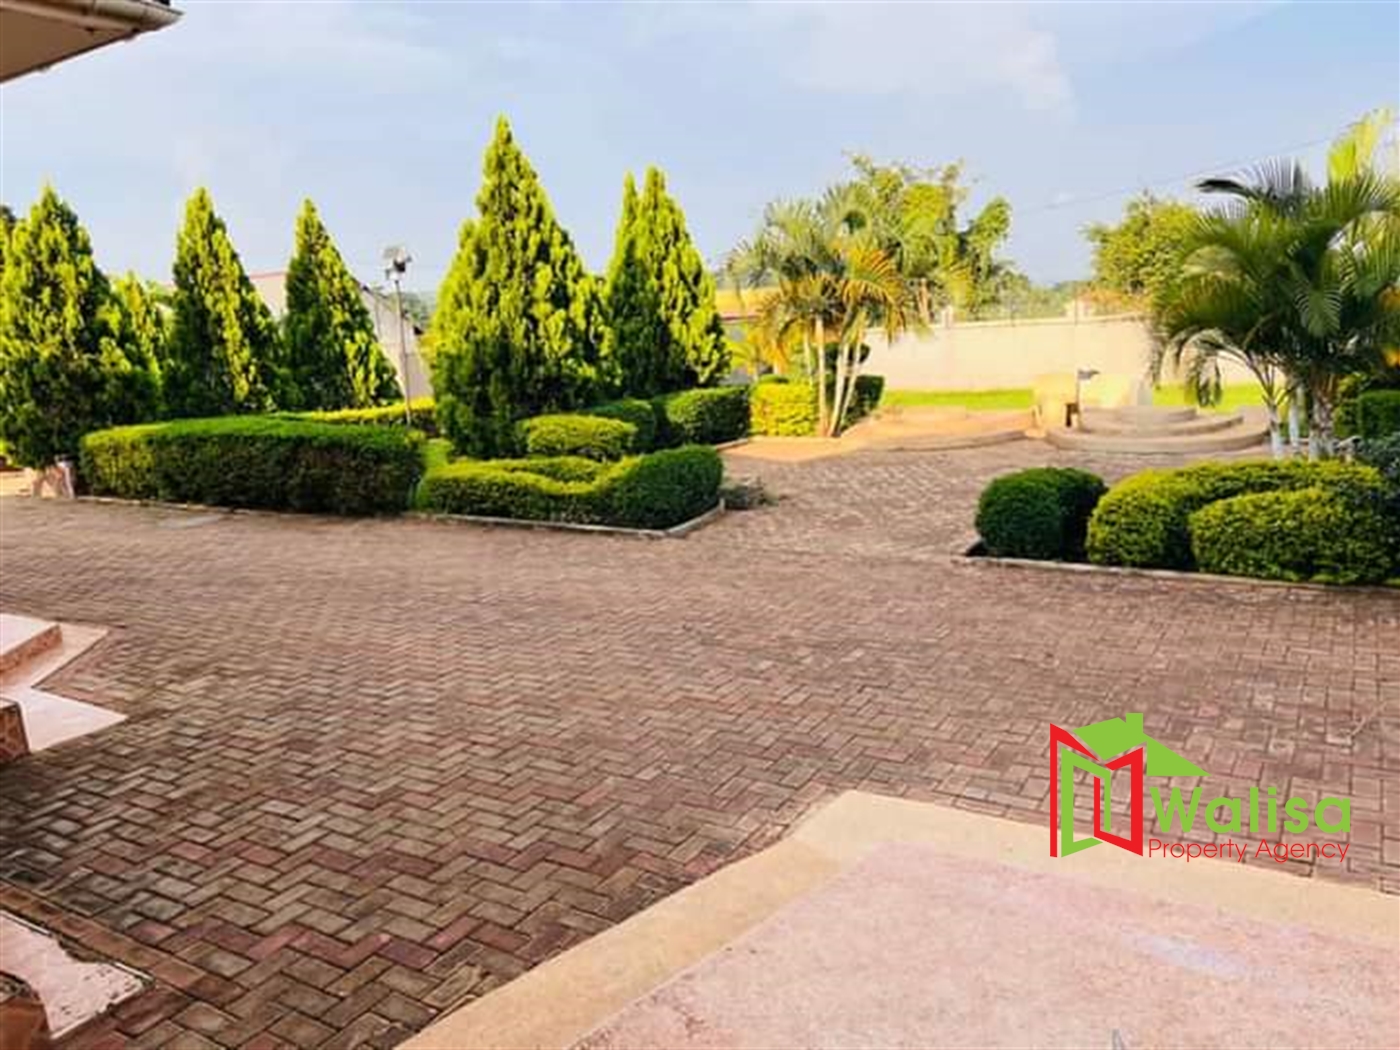 Mansion for sale in gayaza Wakiso